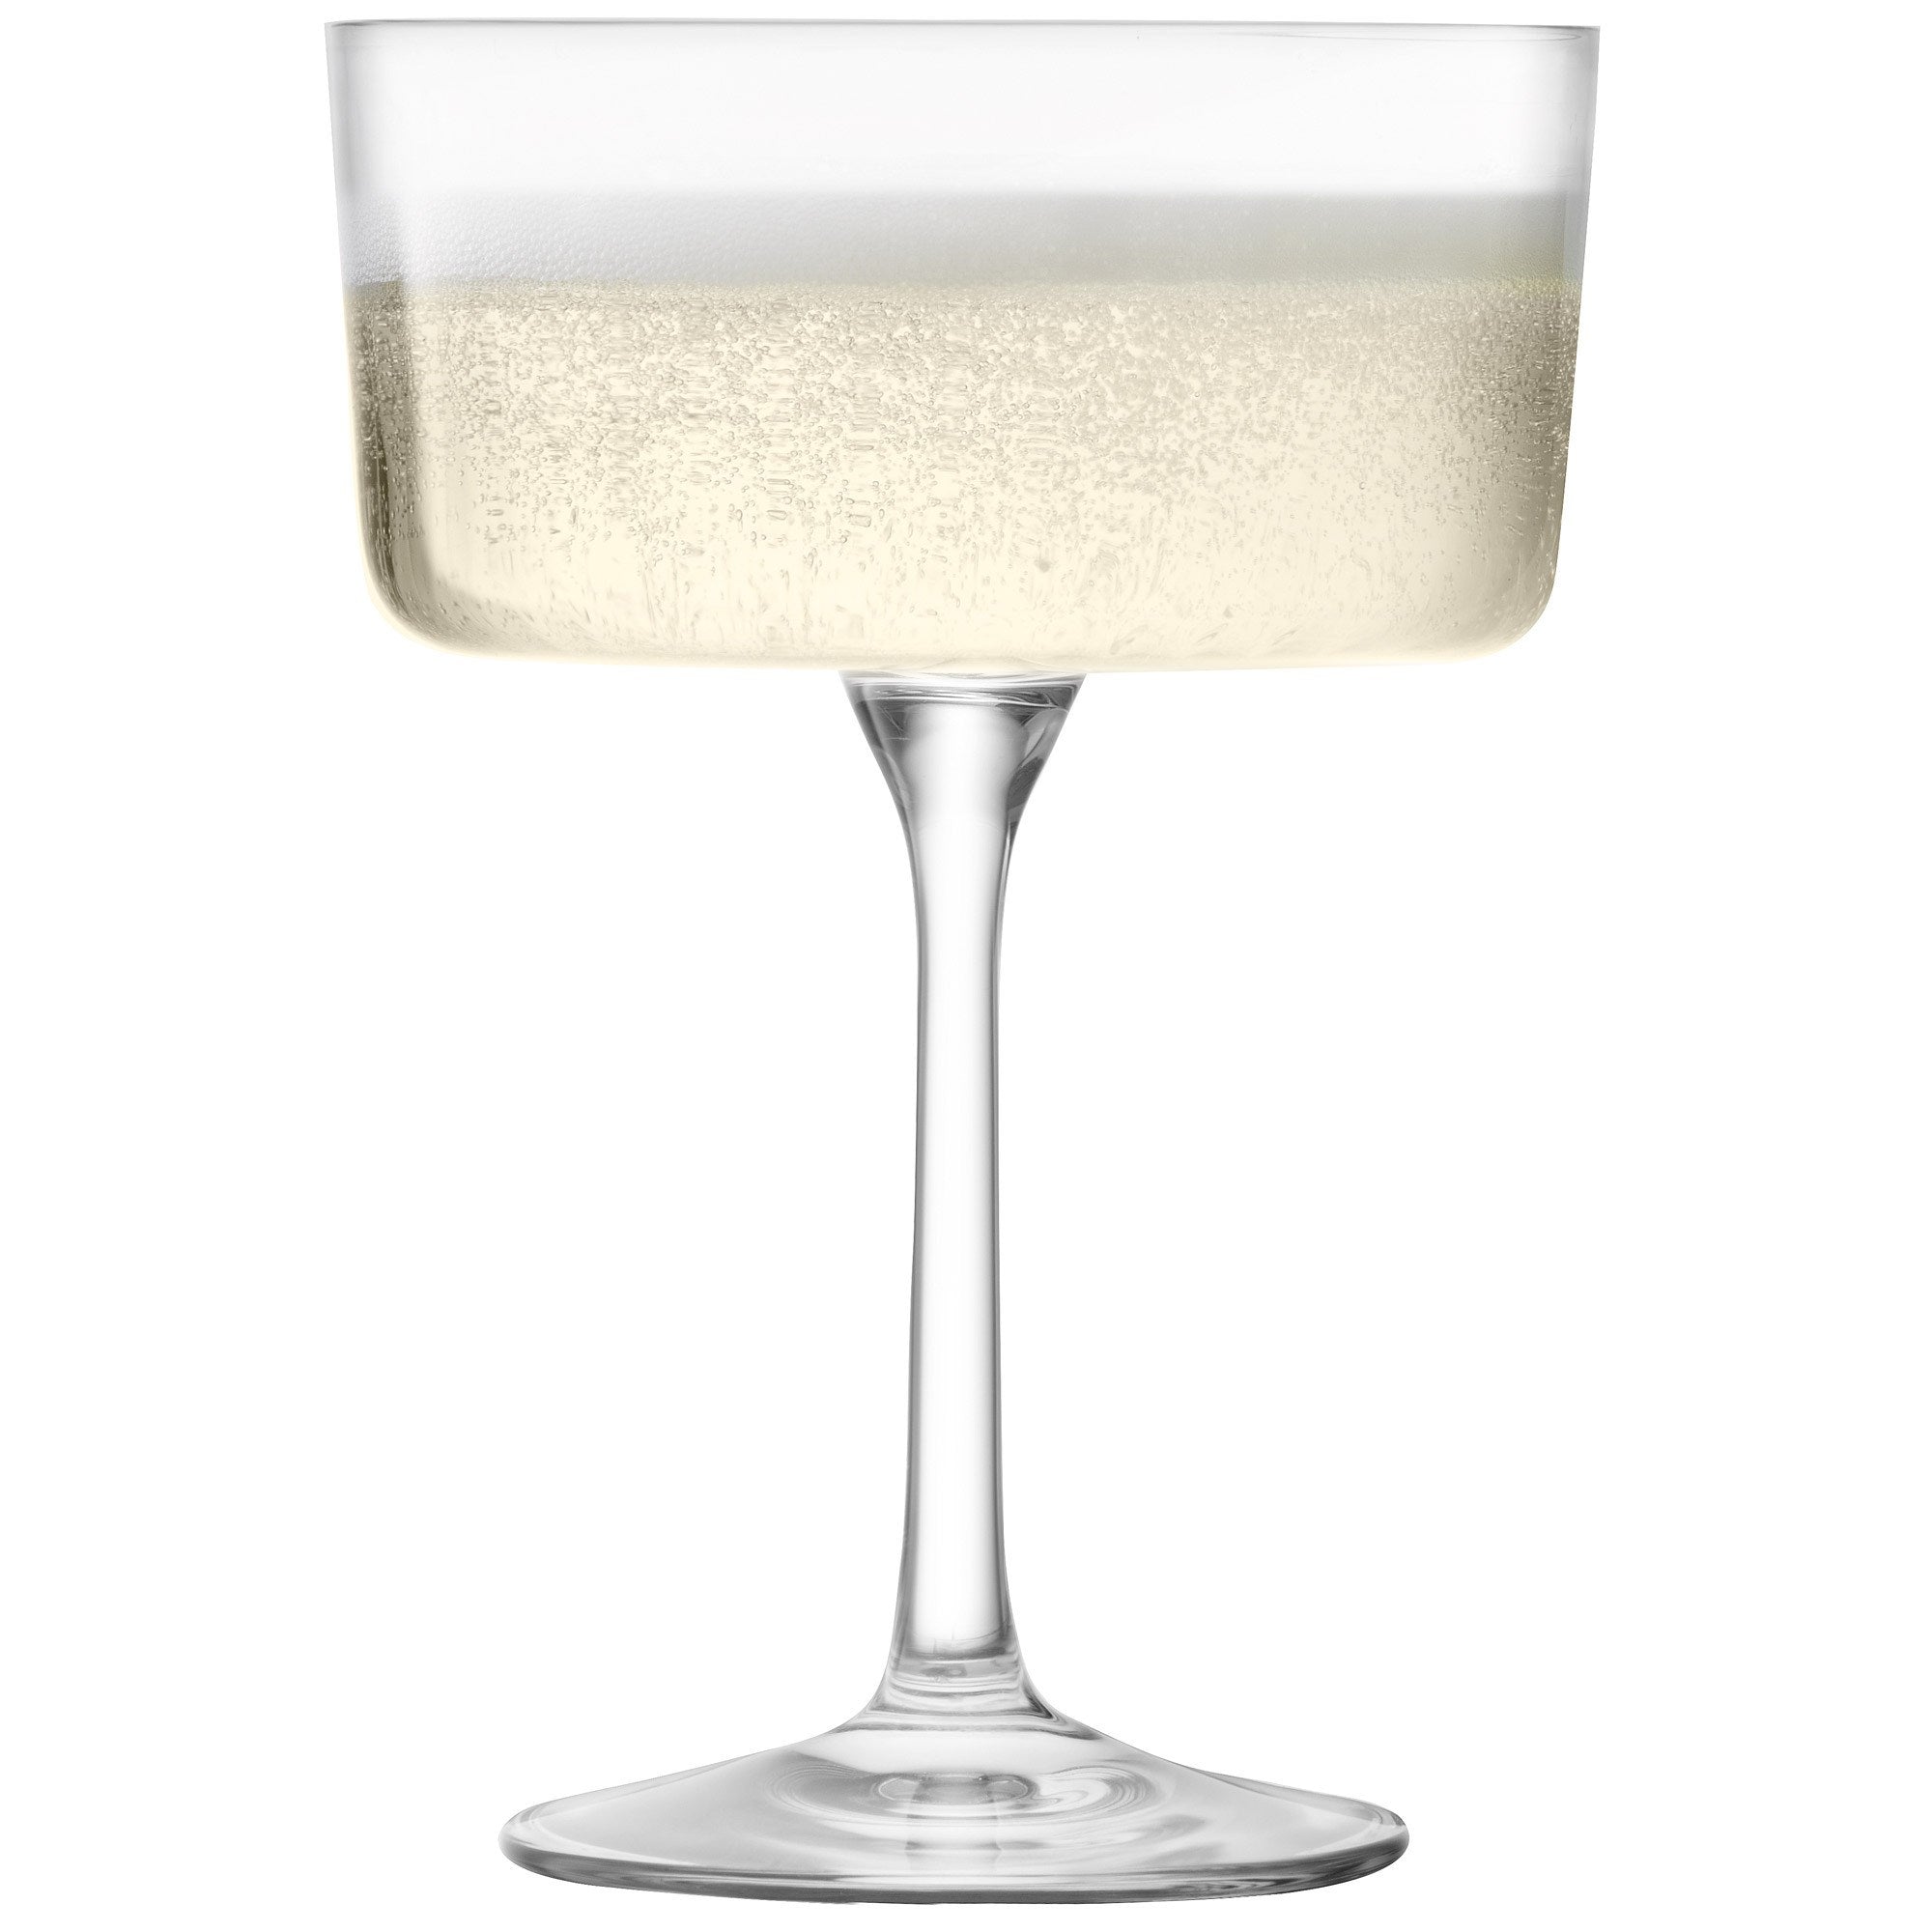 Gio Champagne Coupes - Set of 4